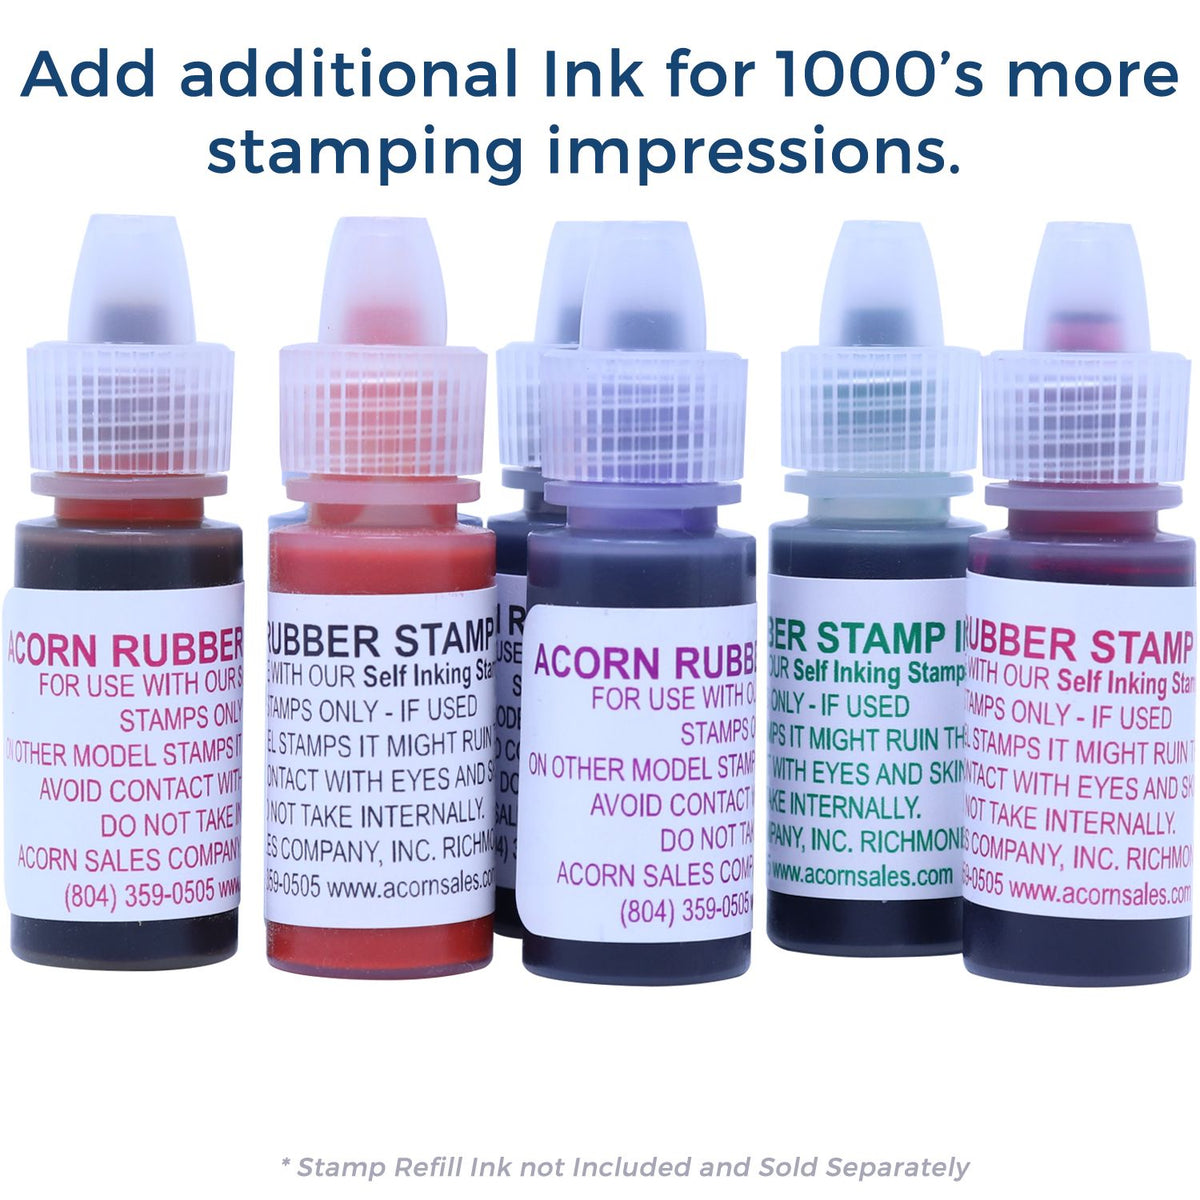 Refill Inks for Large Pre-Inked Attorney-Client Privilege Stamp Available